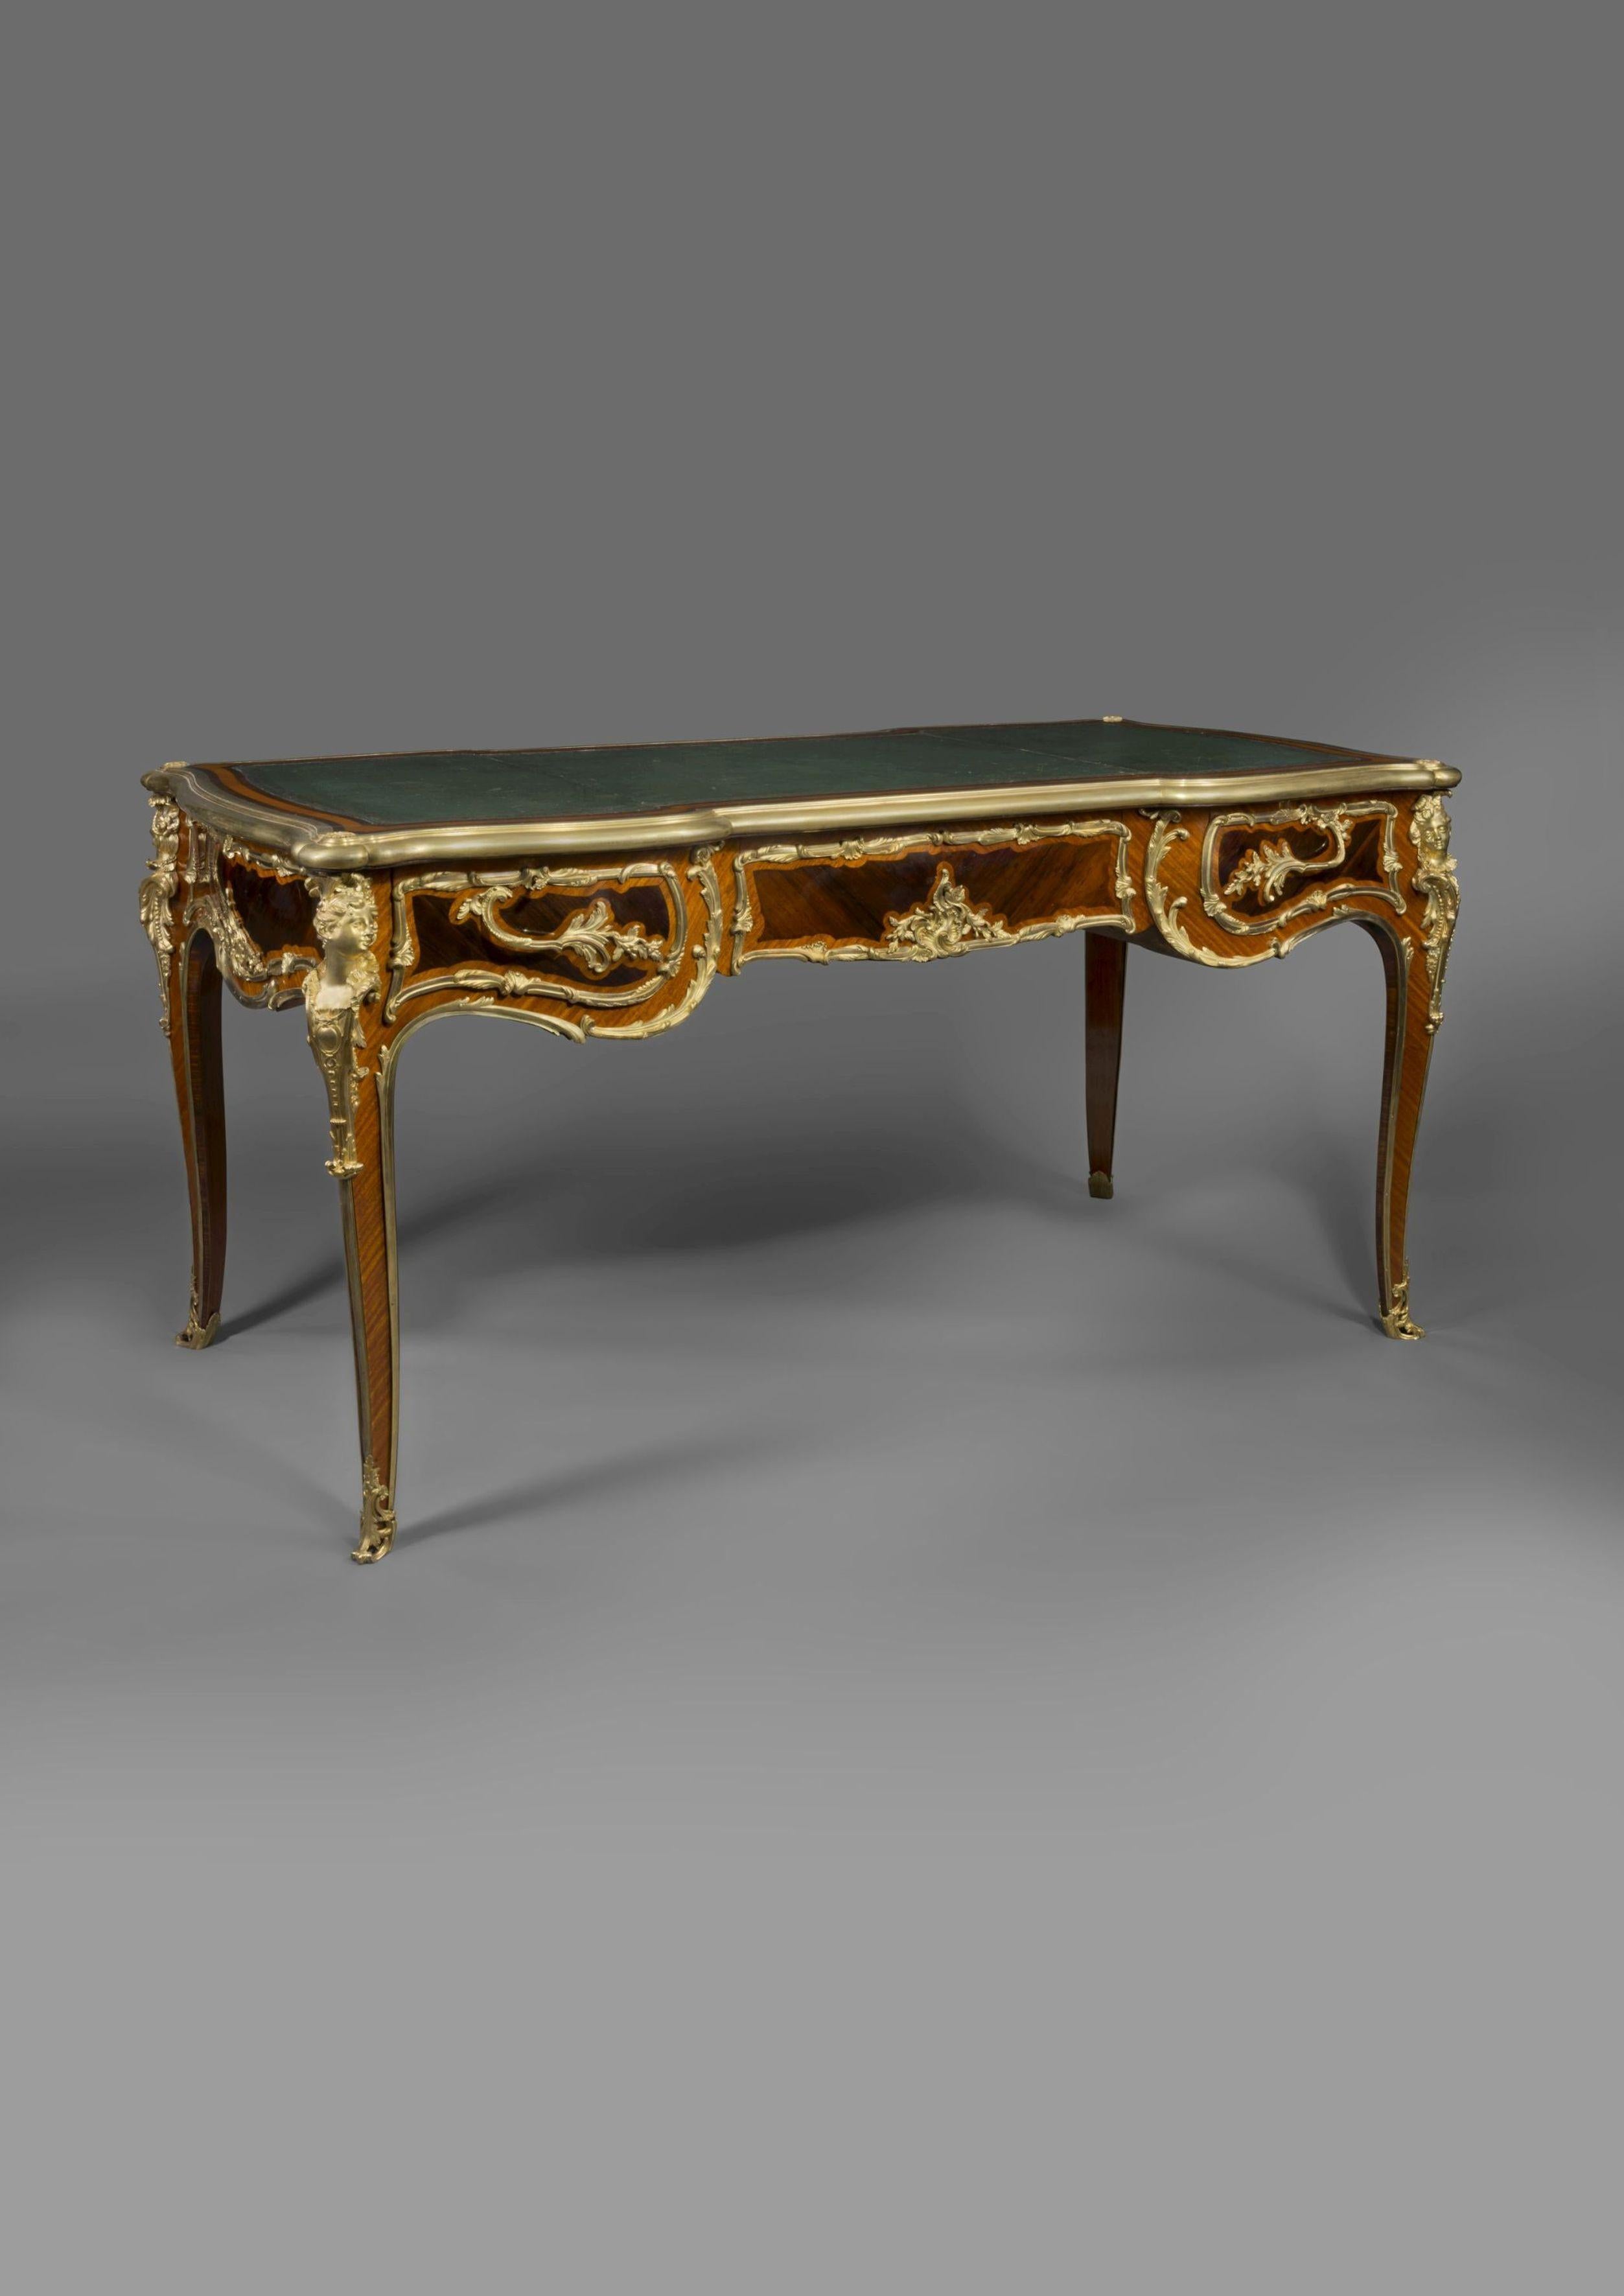 A Regence style gilt bronze-mounted bureau plat by Zwiener.

French, circa 1890. 

Stamped to the reverse of the bronze mounts 'JZ'. 

This fine bureau plat has a shaped leather inset top with gilt-bronze encadrement above three frieze drawers